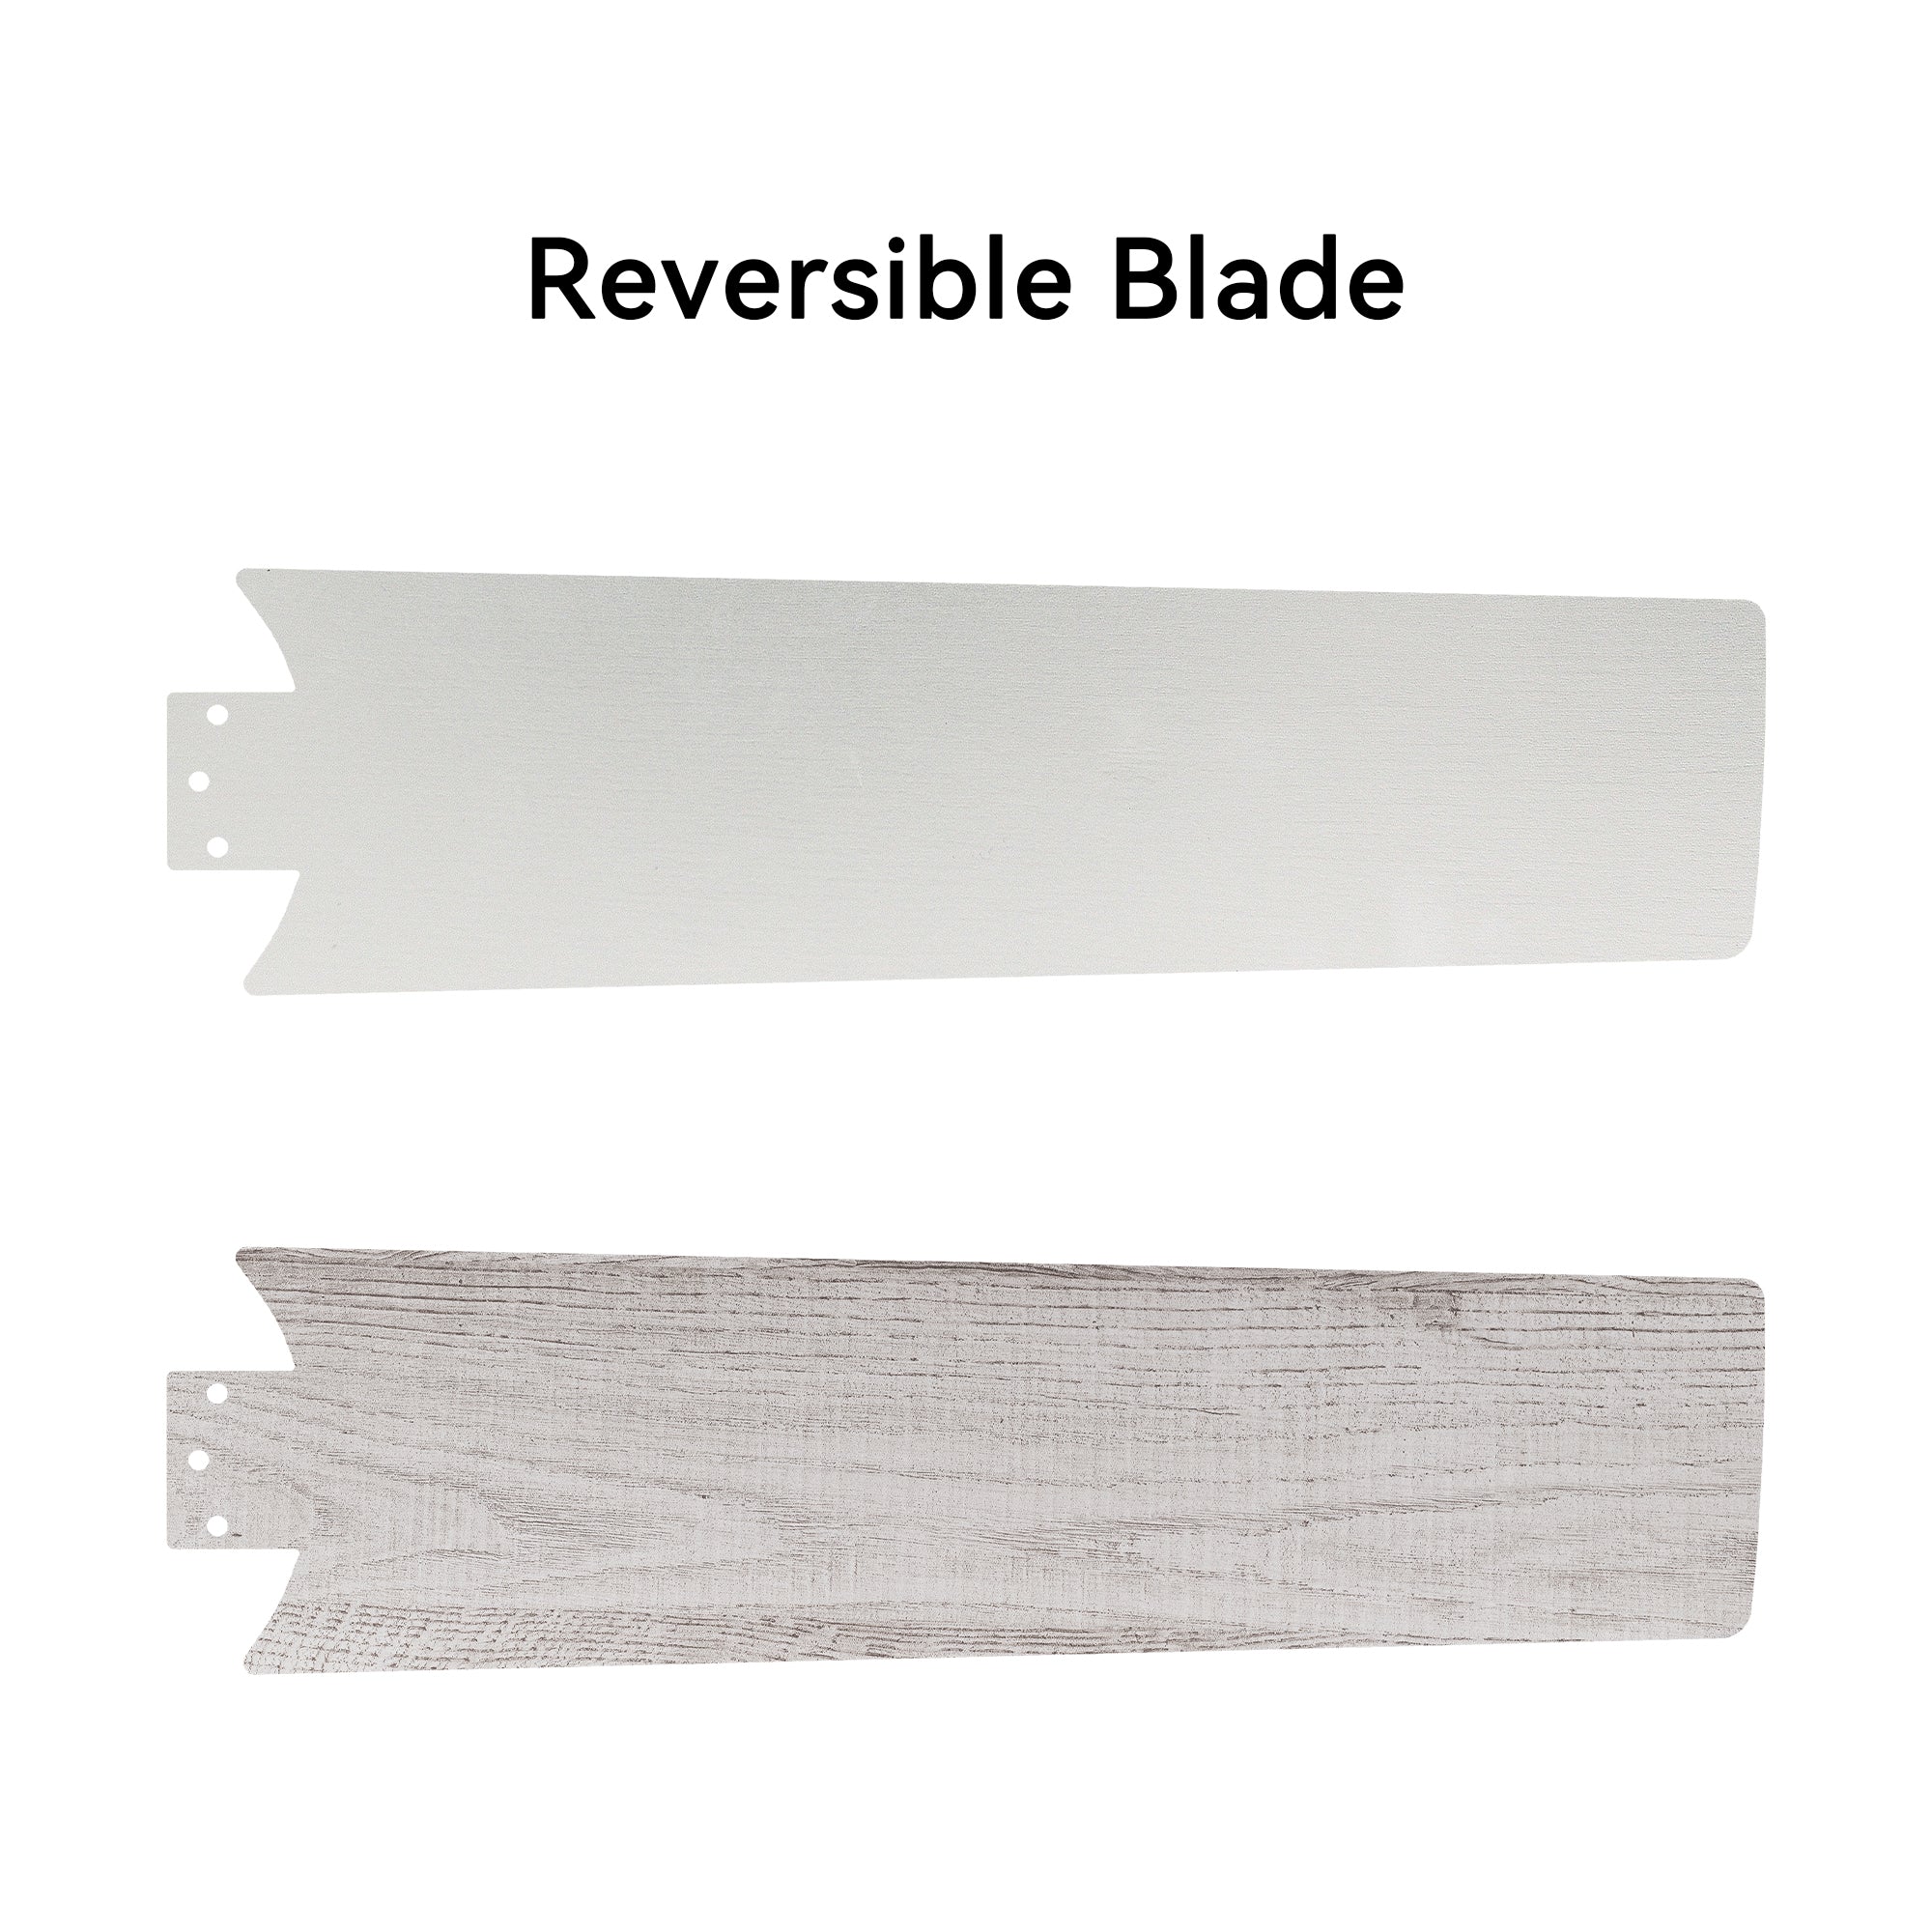 Low profile ceiling fan with reversible plywood blades, such as white and light-color wood pattern. 